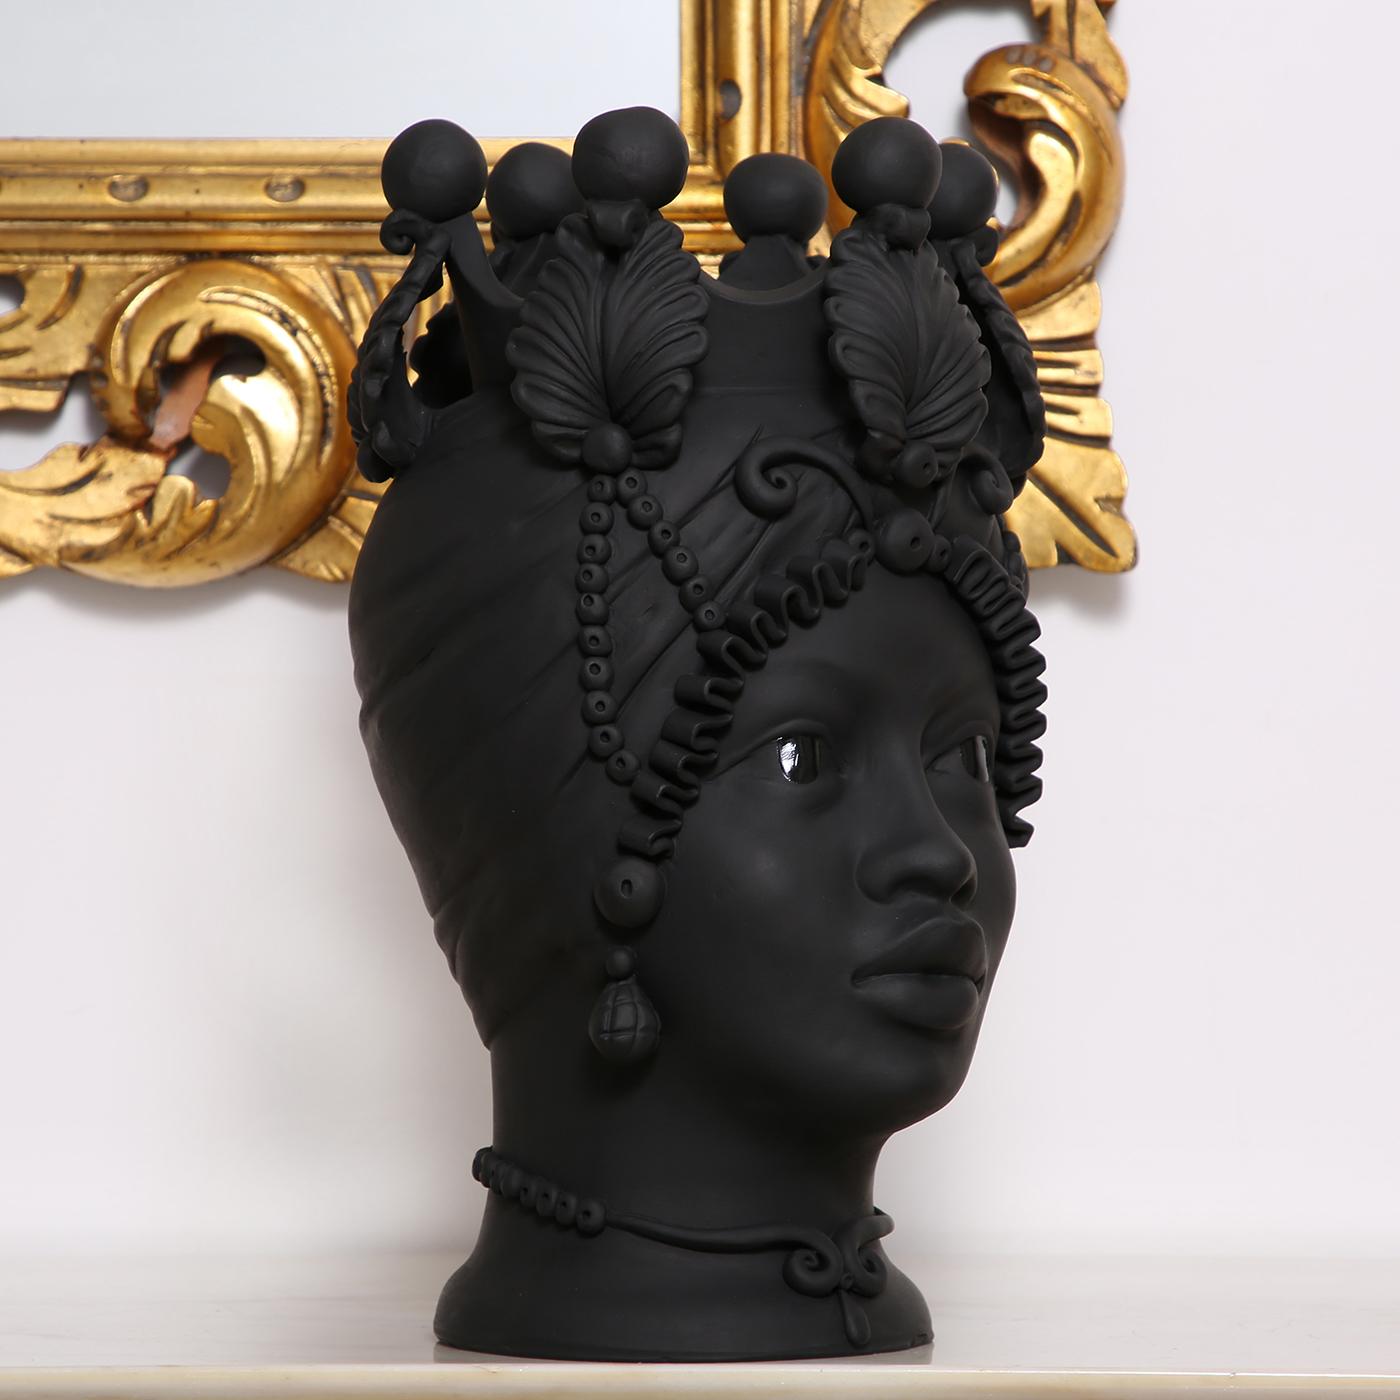 Meticulously handcrafted by ceramicist Stefania Boemi, this anthropomorphic vase of the Greek goddess Persephone is a testament to ancient crafting traditions. Crafted of terracotta with a rich matte black glaze, the vase delicately represents the